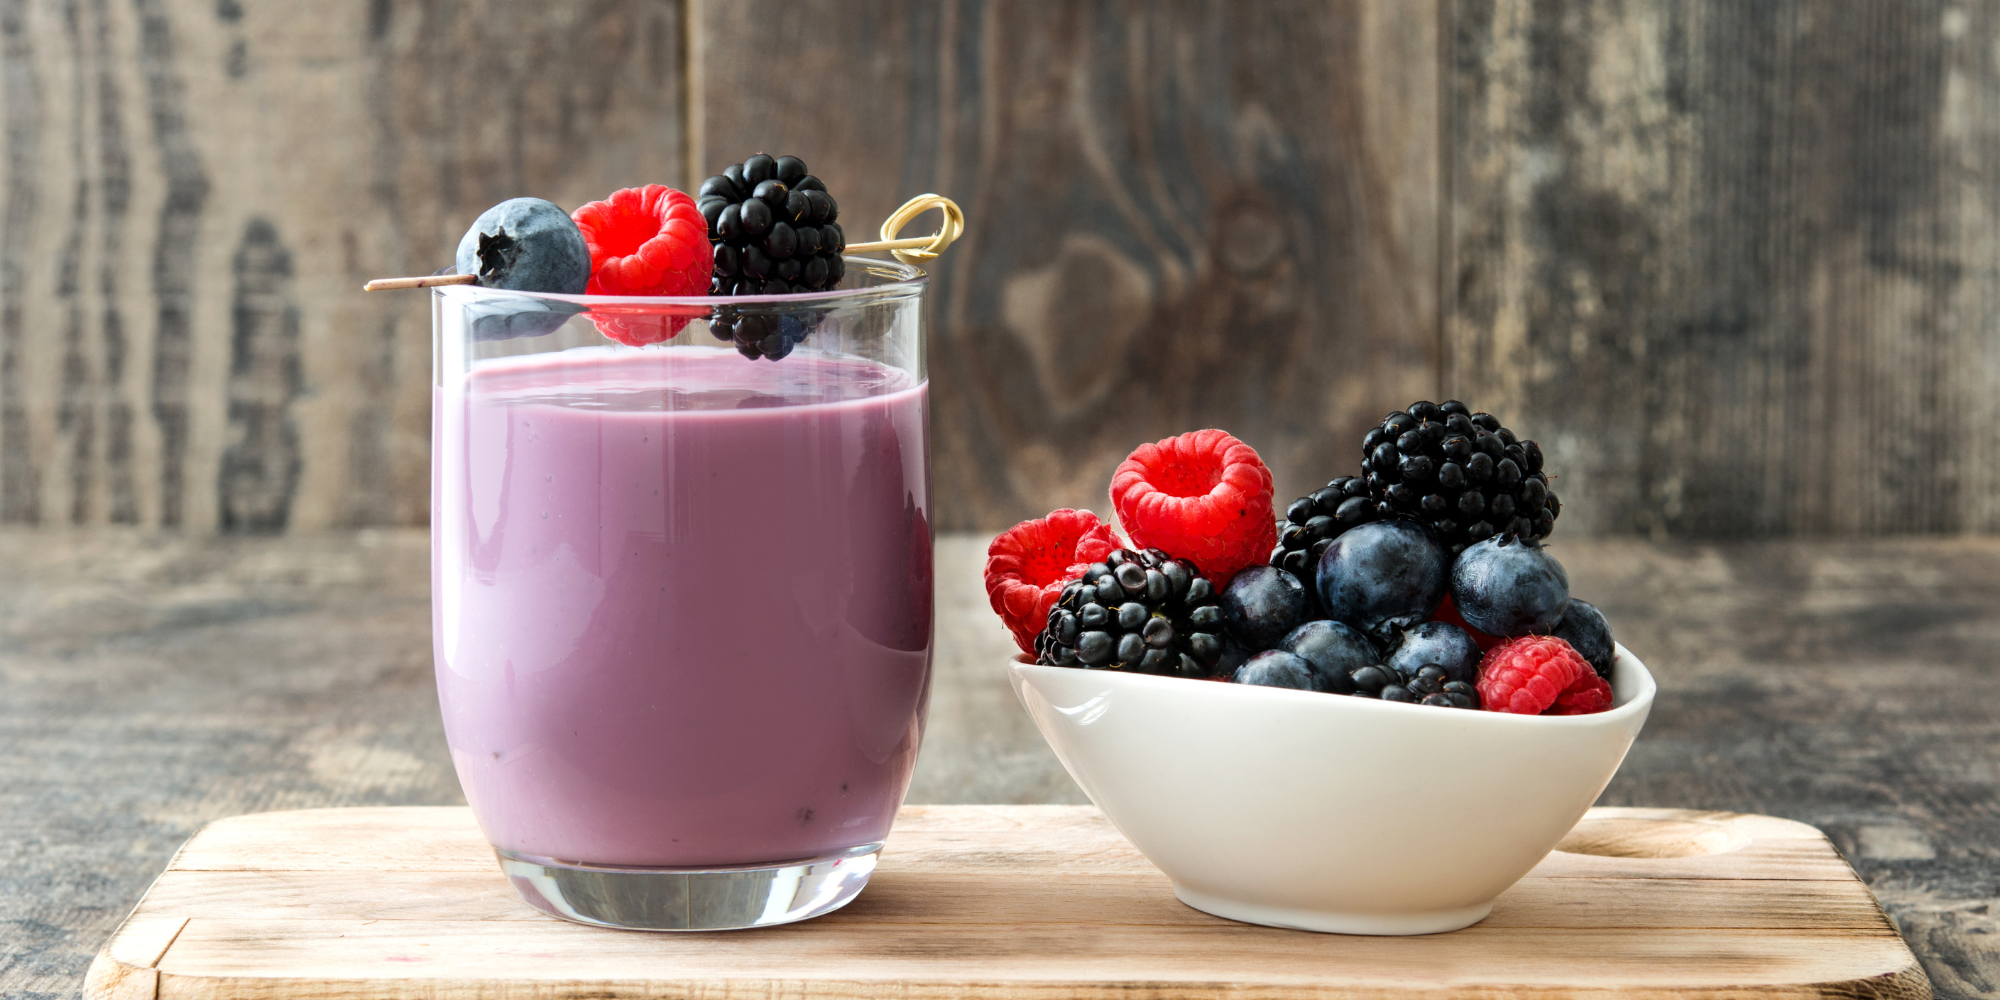 A short glass cup full of a purple berry smoothie. To the right of the glass is a bowl of berries.